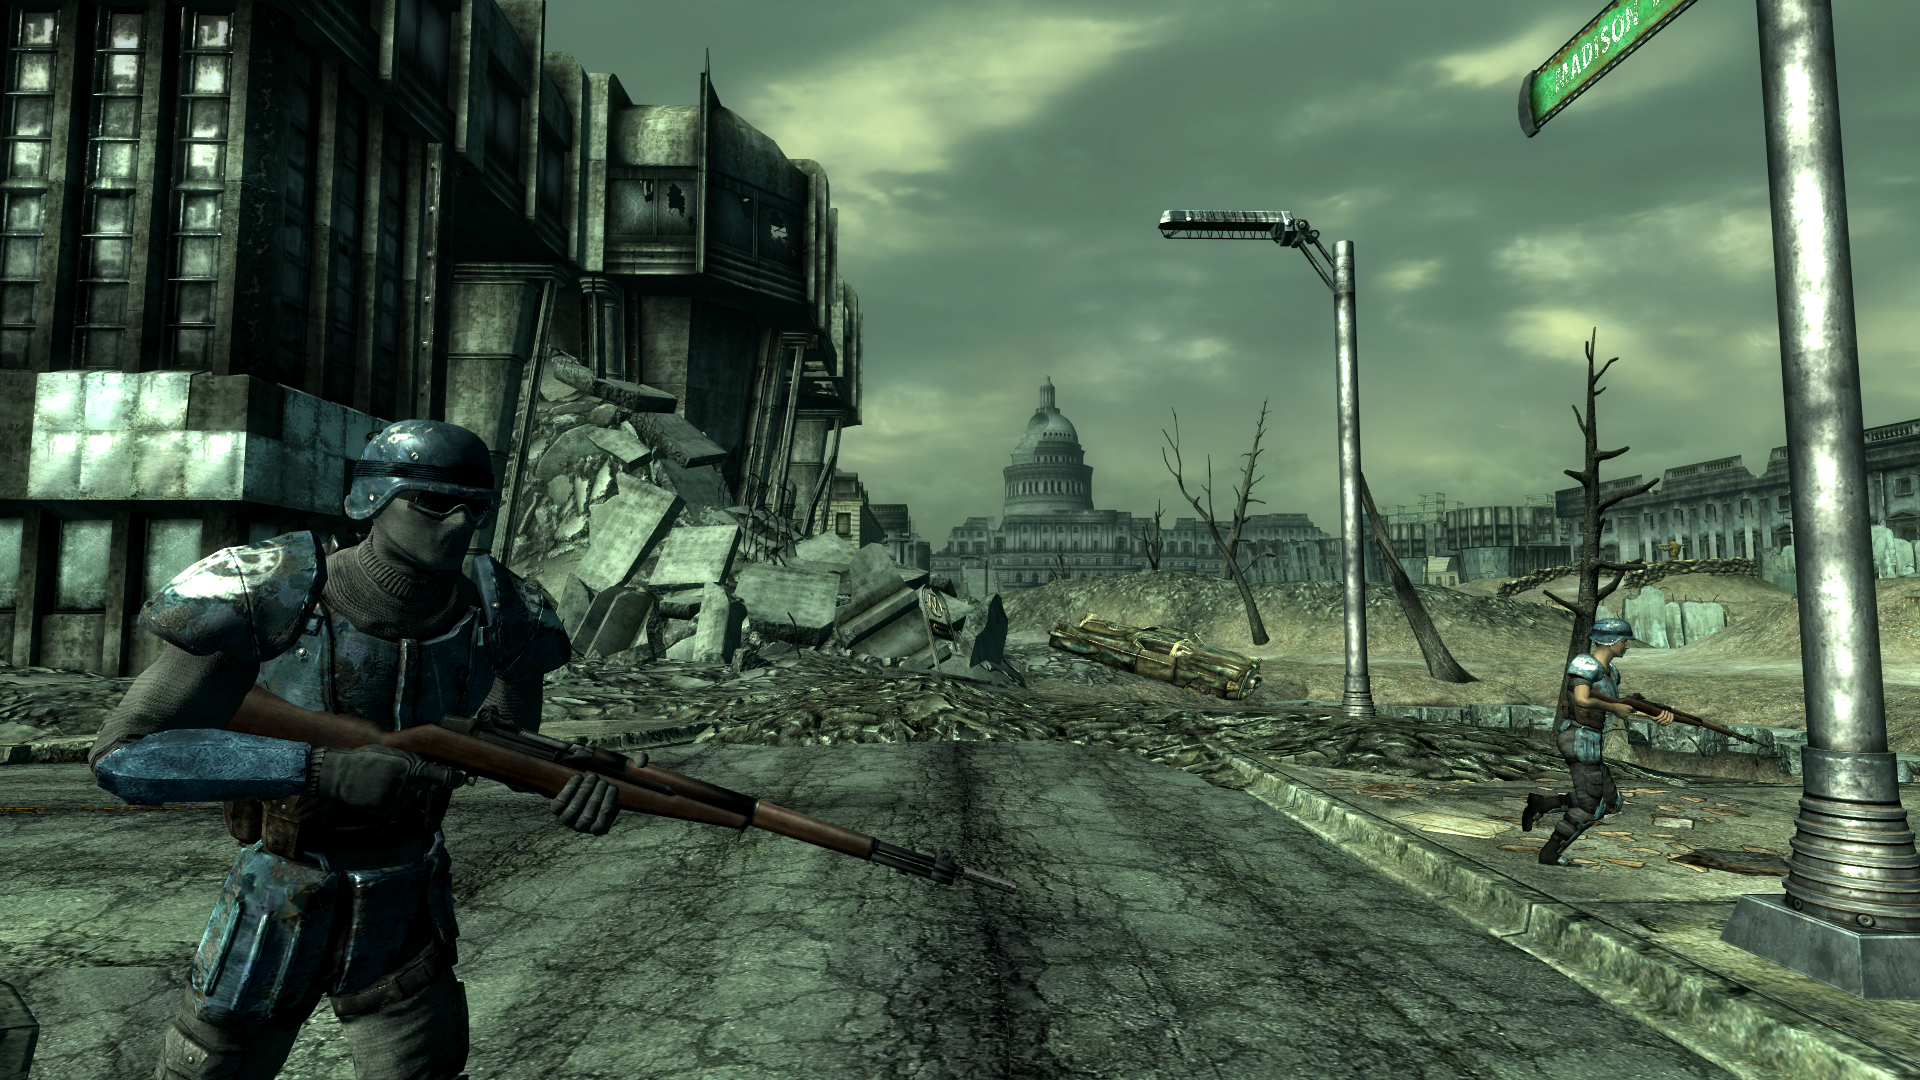 Image 30 - Rebuild the Capital - A Brotherhood of Steel Expansion Mod for Fallout 3 - Mod DB